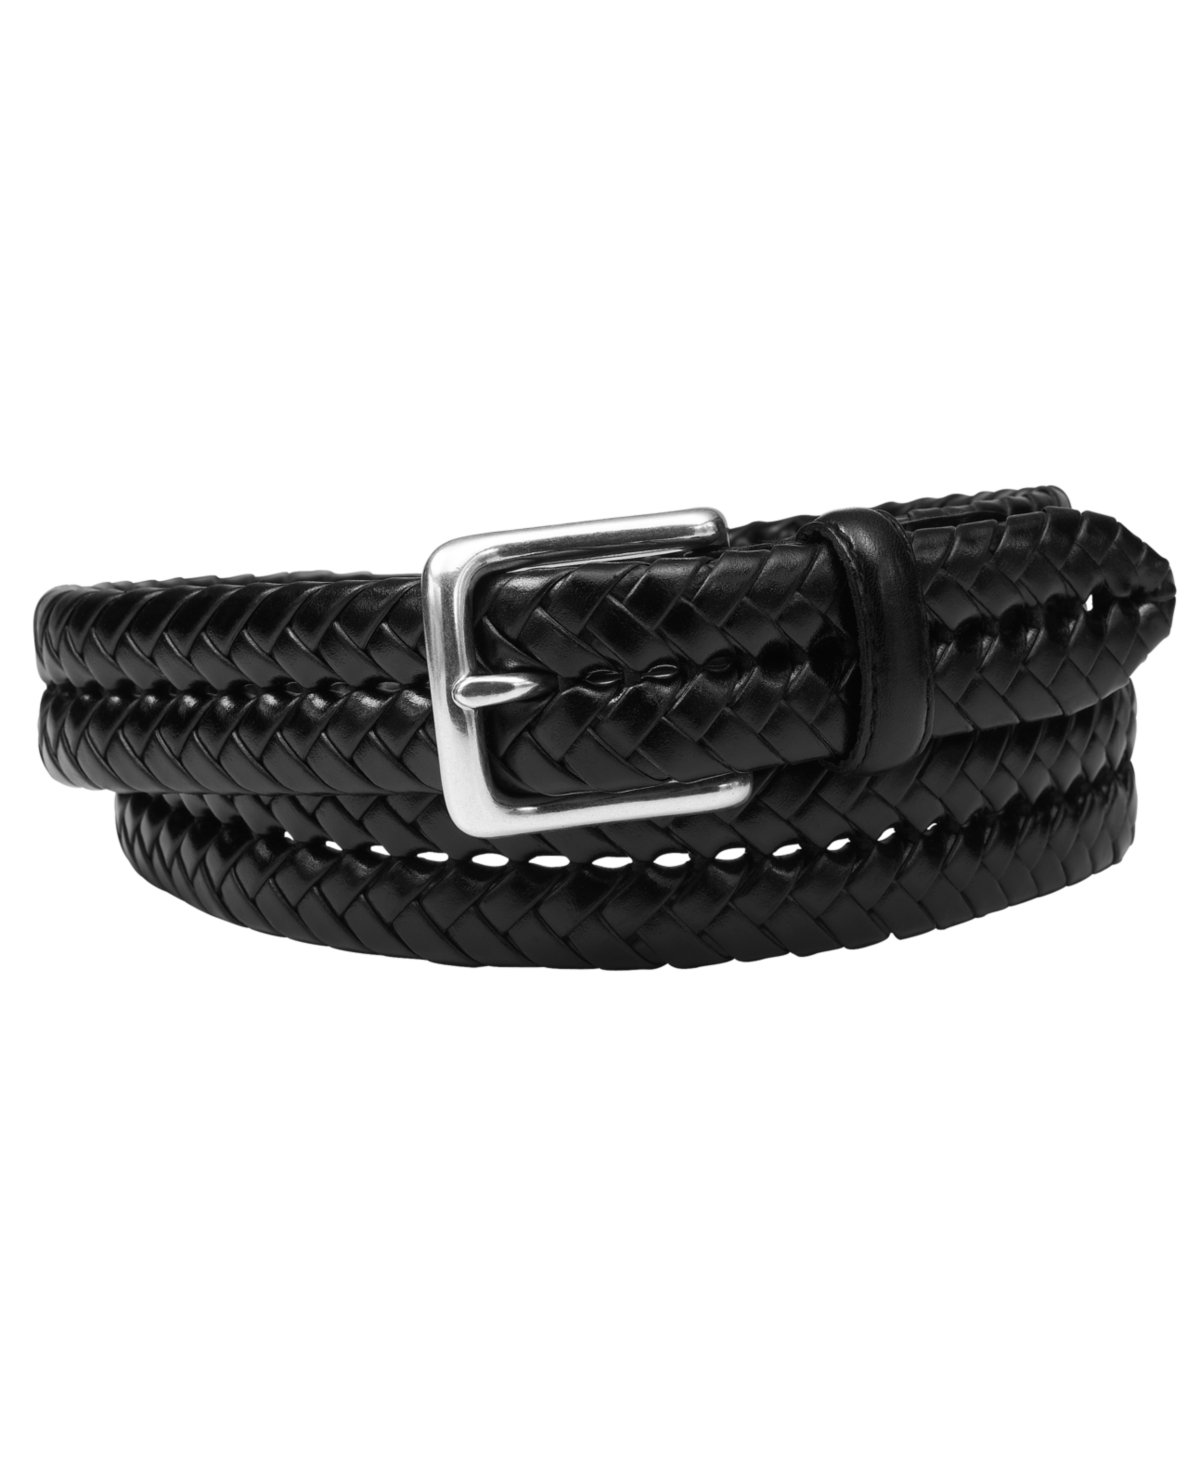 UPC 762346083498 product image for Fossil Maddox Braided Leather Belt | upcitemdb.com